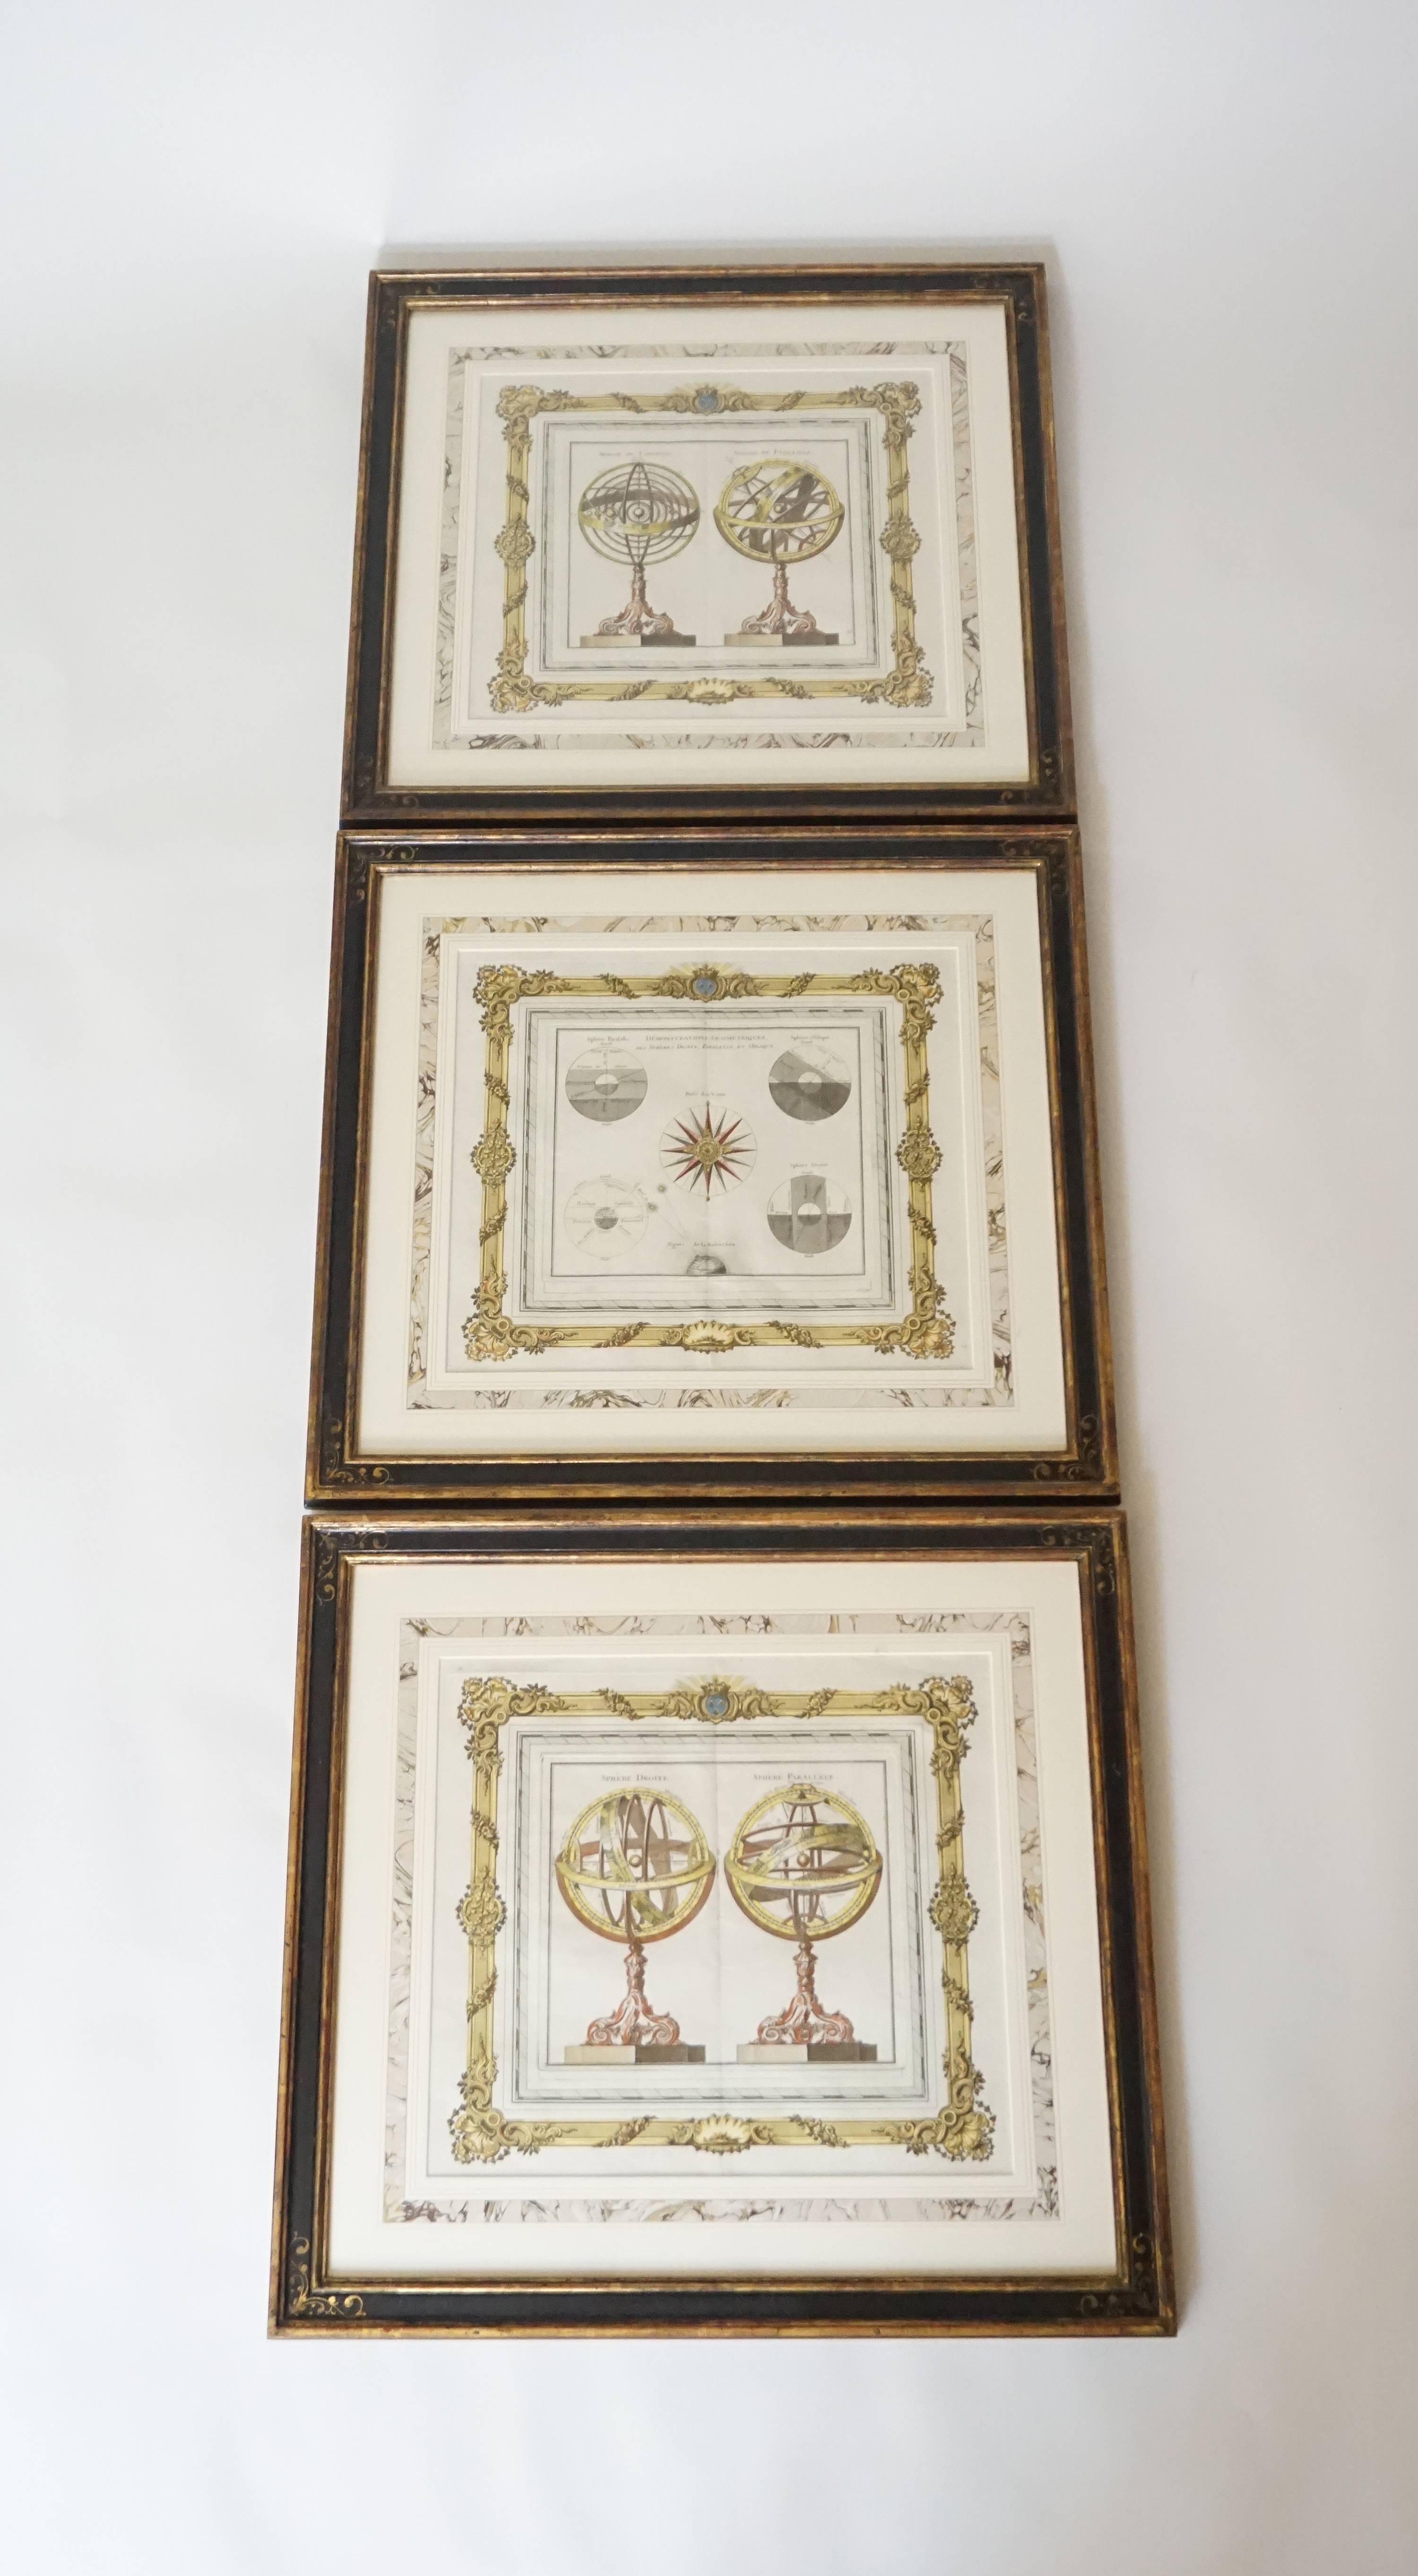 Collection of three hand-colored astronomical map engravings illustrating celestial spheres in ornate rococo borders by Louis Brion de la Tour (1743-1803) and Louis Charles Desnos (circa 1725-1805); Published by Louis Charles Desnos; Paris, 1766;